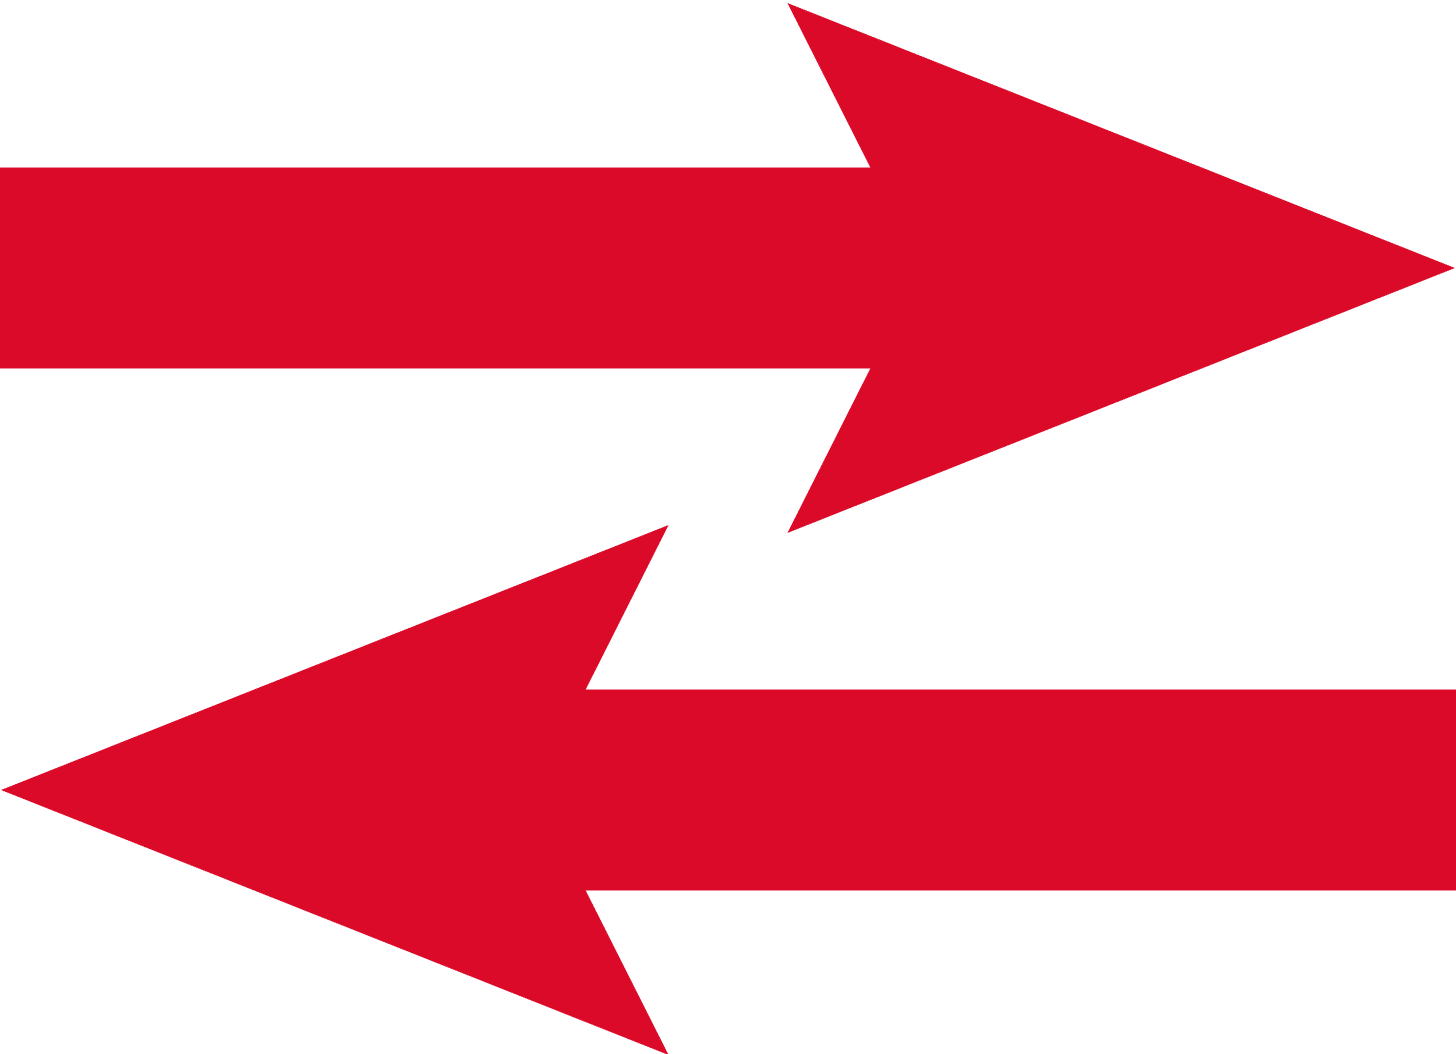 Two horizontal arrows pointing to the left and right